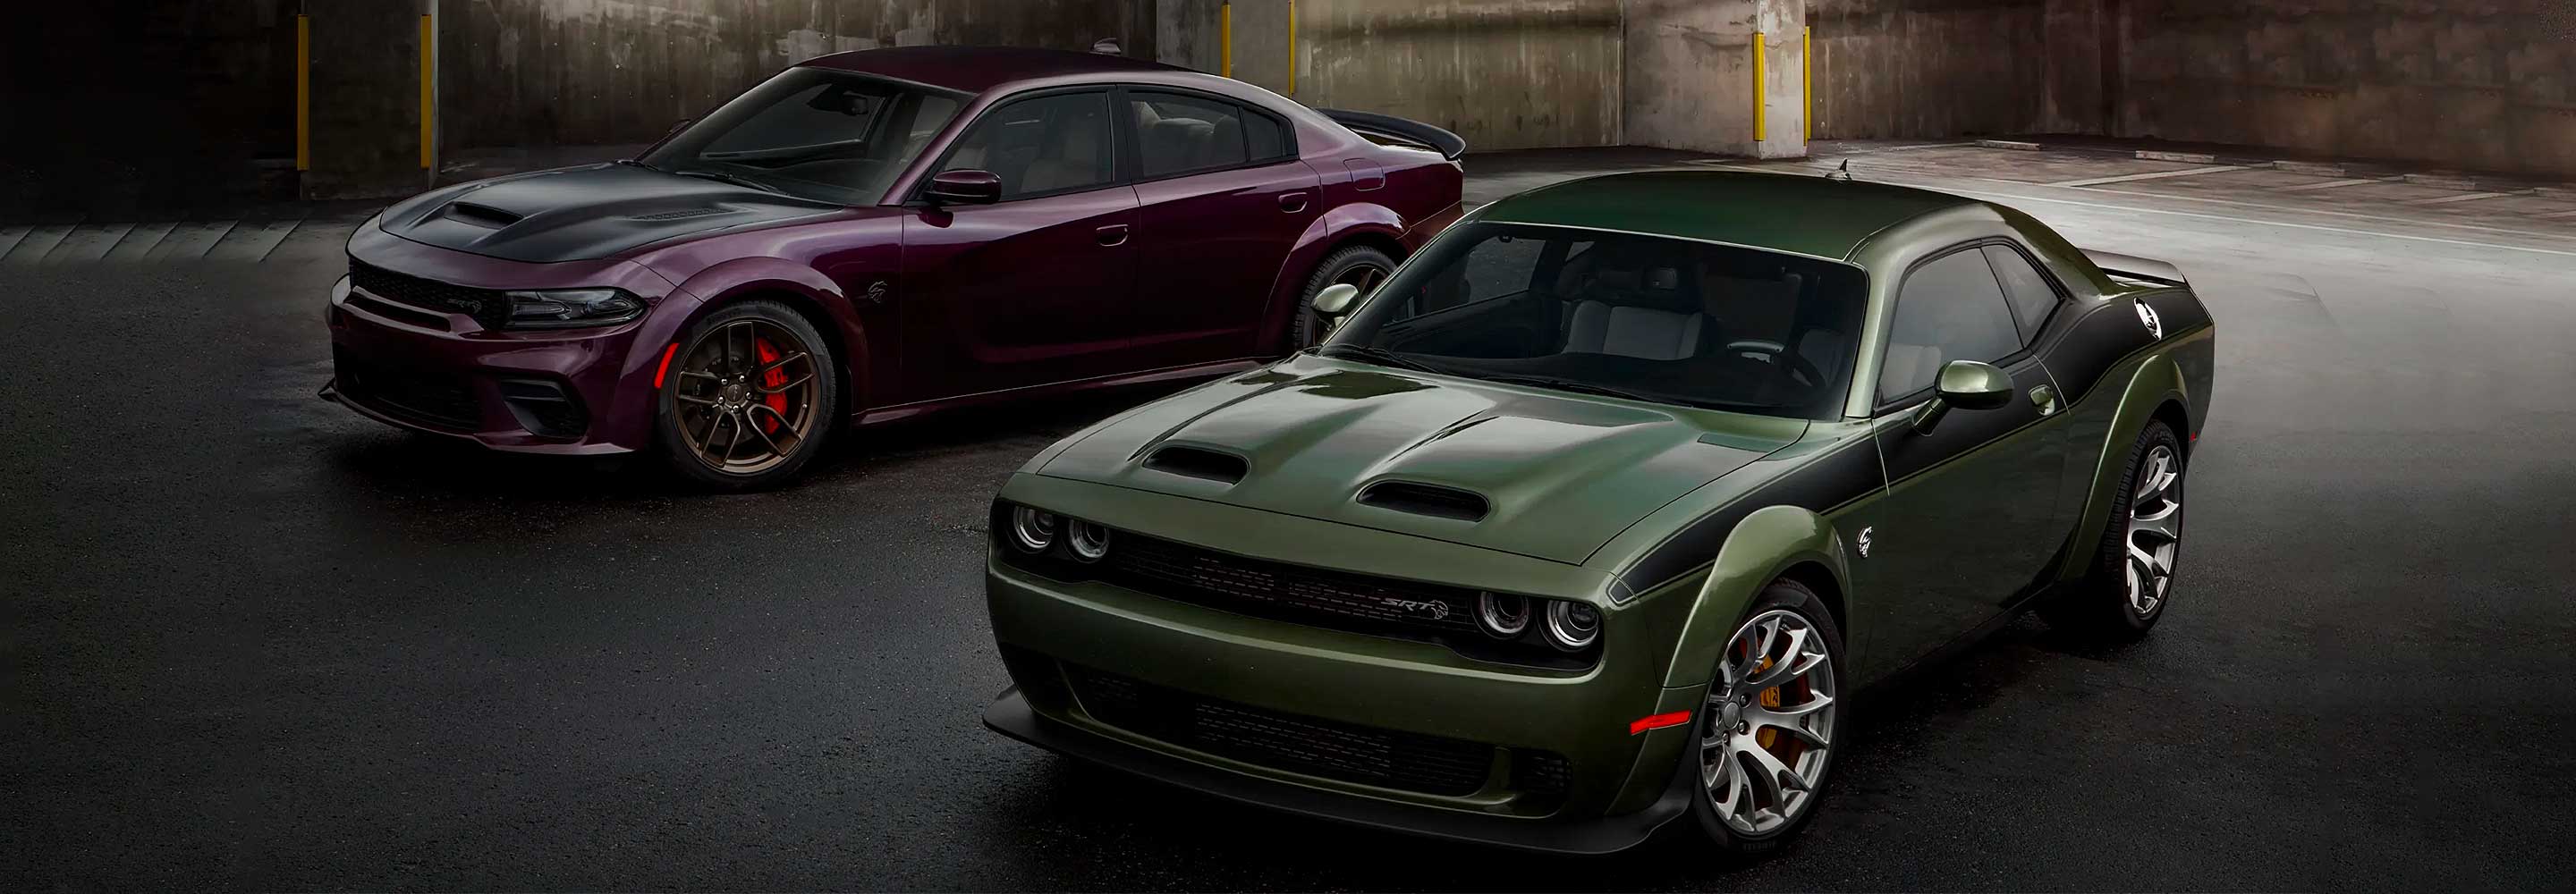 Jailbreak Out of the Ordinary: 2022 Dodge Charger and Challenger SRT Jailbrea